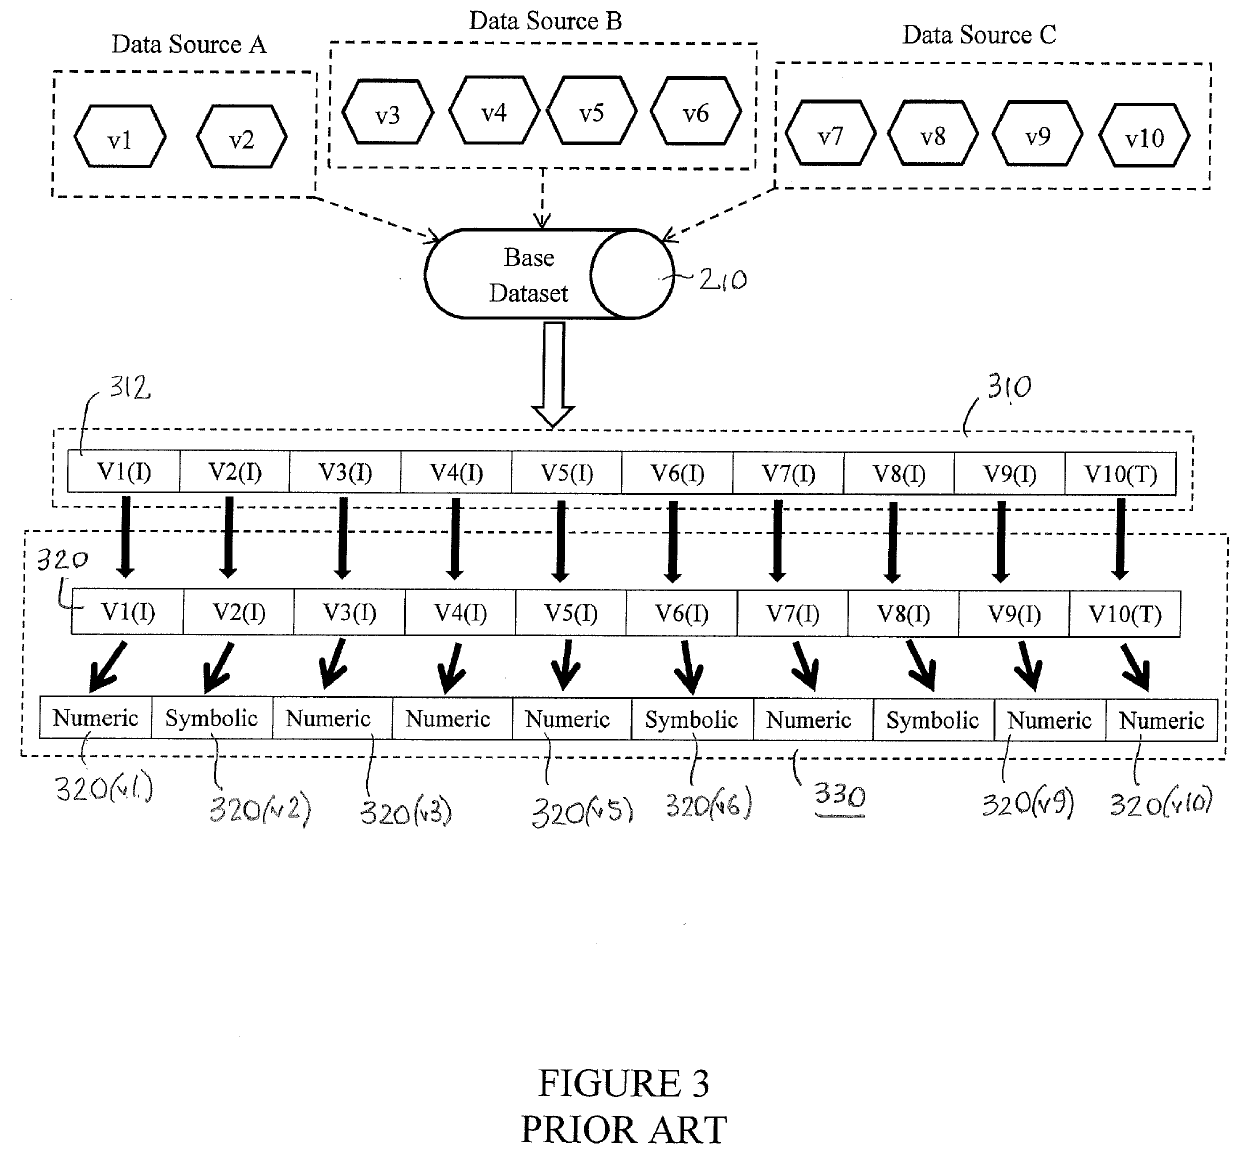 Systems and methods for preparing data for use by machine learning algorithms